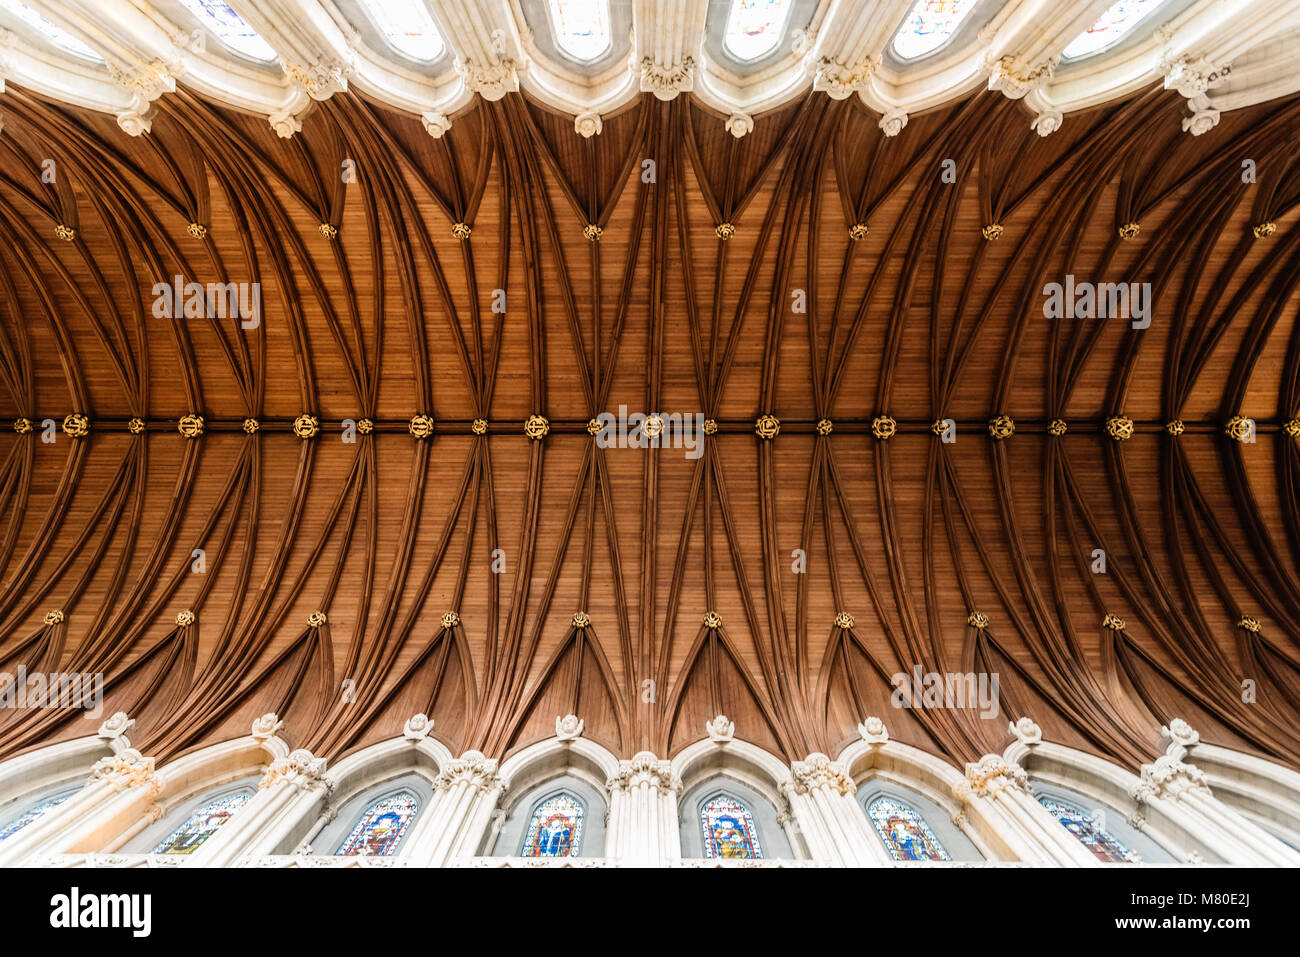 Cobh, Ireland - November 9, 2017: Interior view of St. Colman Cathedral in Cobn. Directly below view Stock Photo